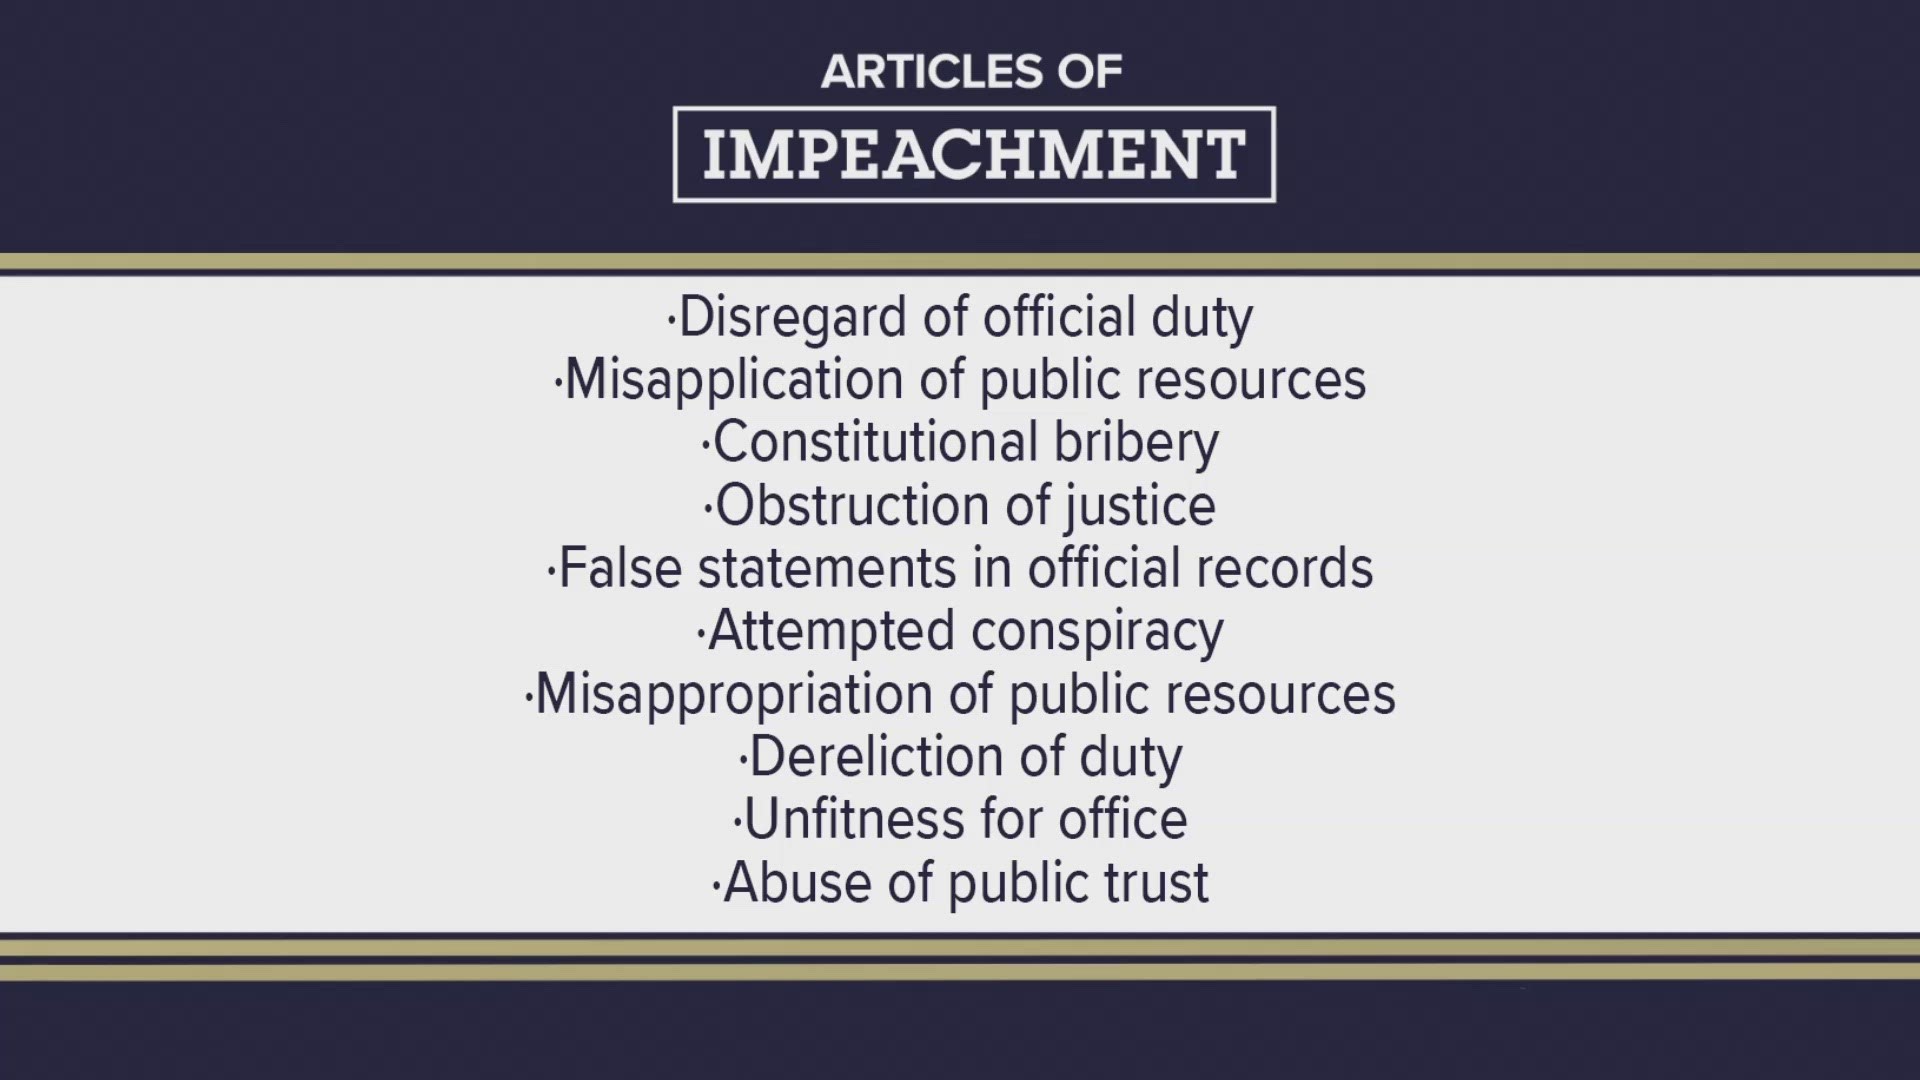 Paxton faces 20 articles of impeachment, and the House could vote on them as early as Saturday.